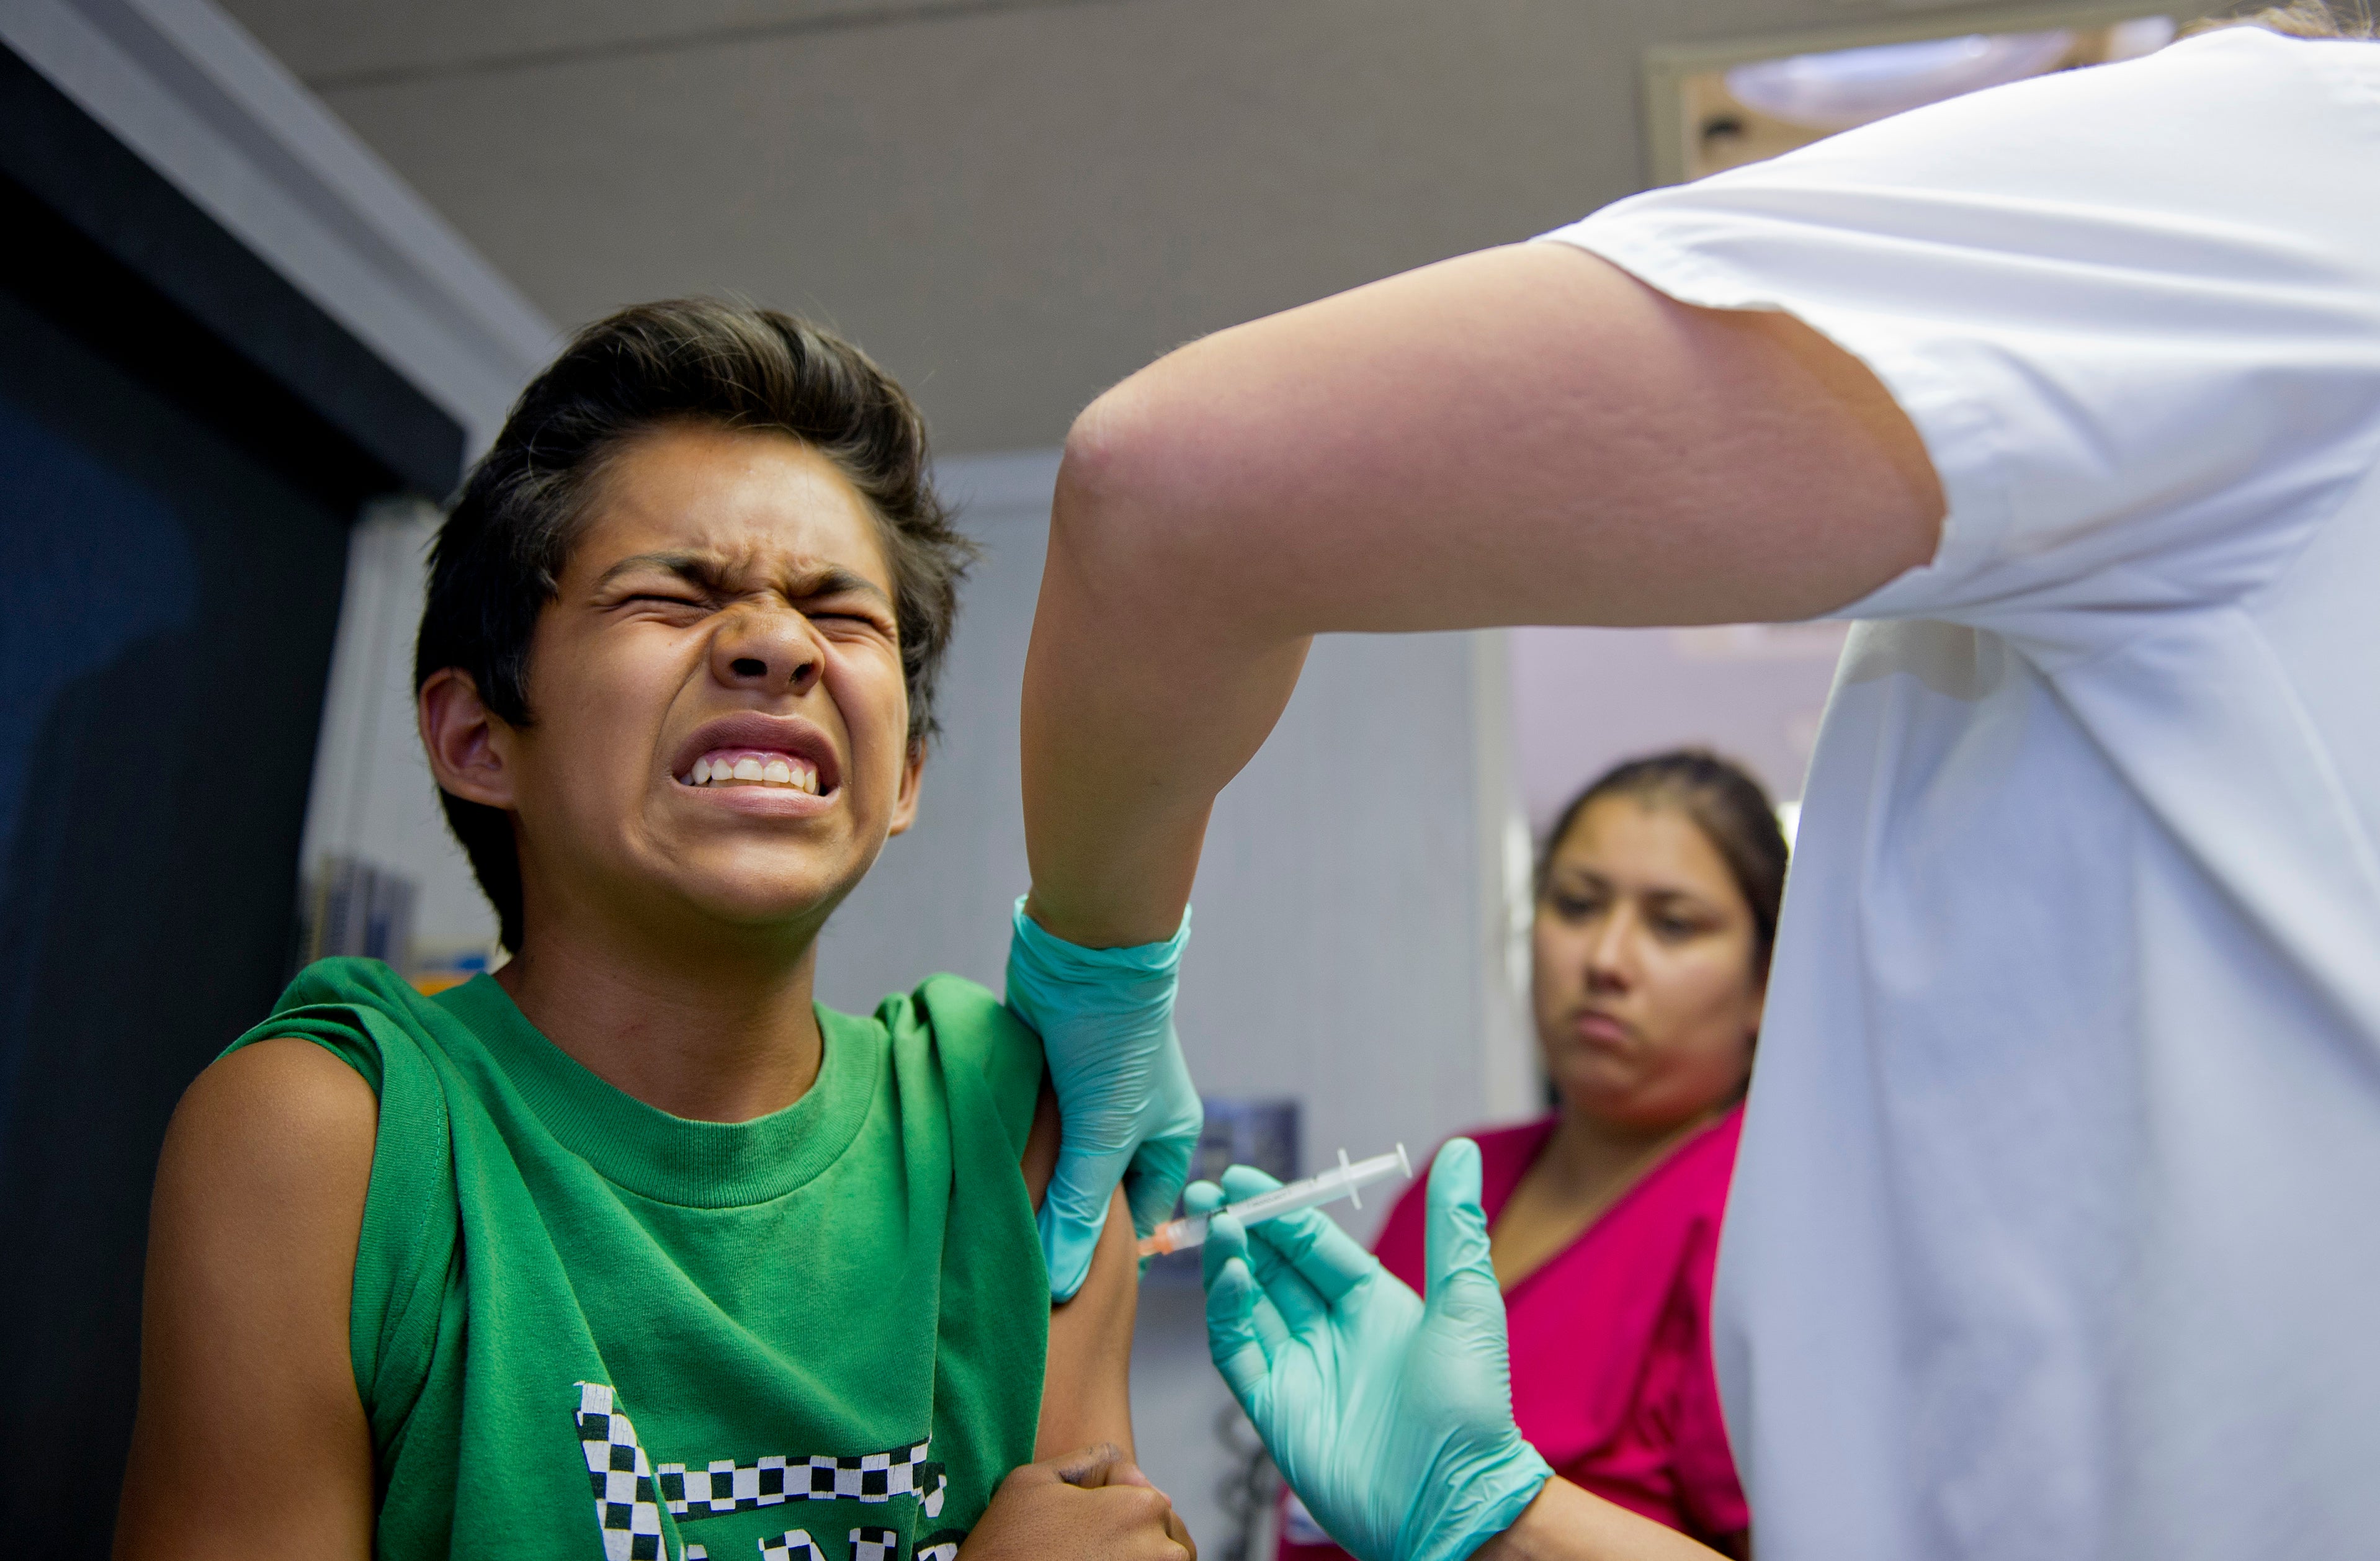 File Public school student Julio Valenzuela, 11, grimaces as he gets a vaccination at a free immunization clinic for students before the start of the school year